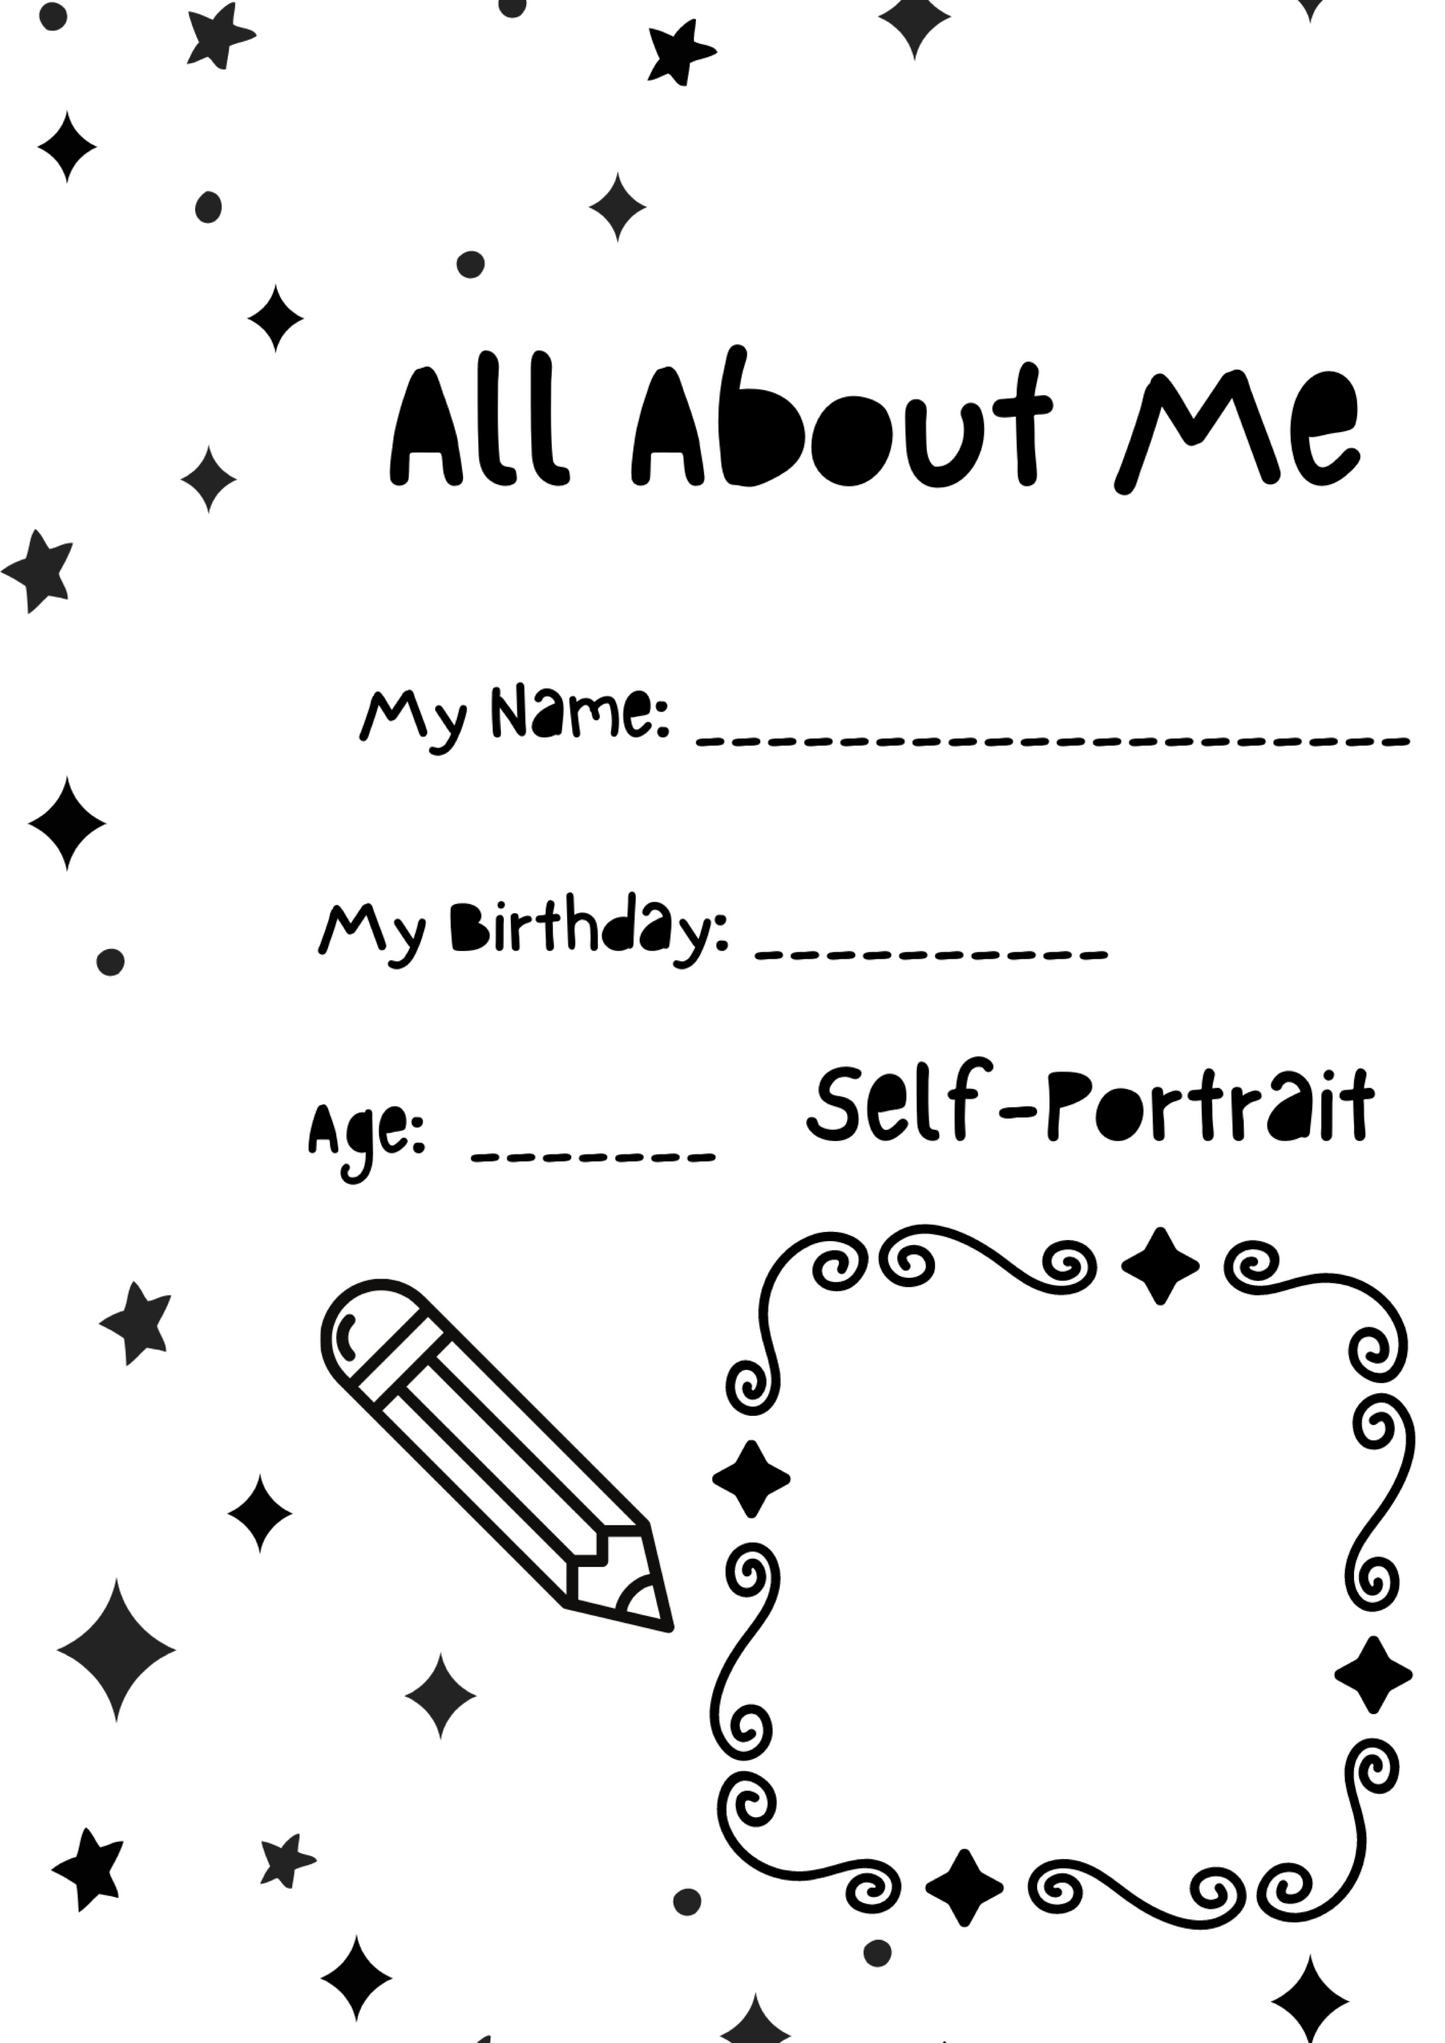 Self Reflection: All About Me Booklet